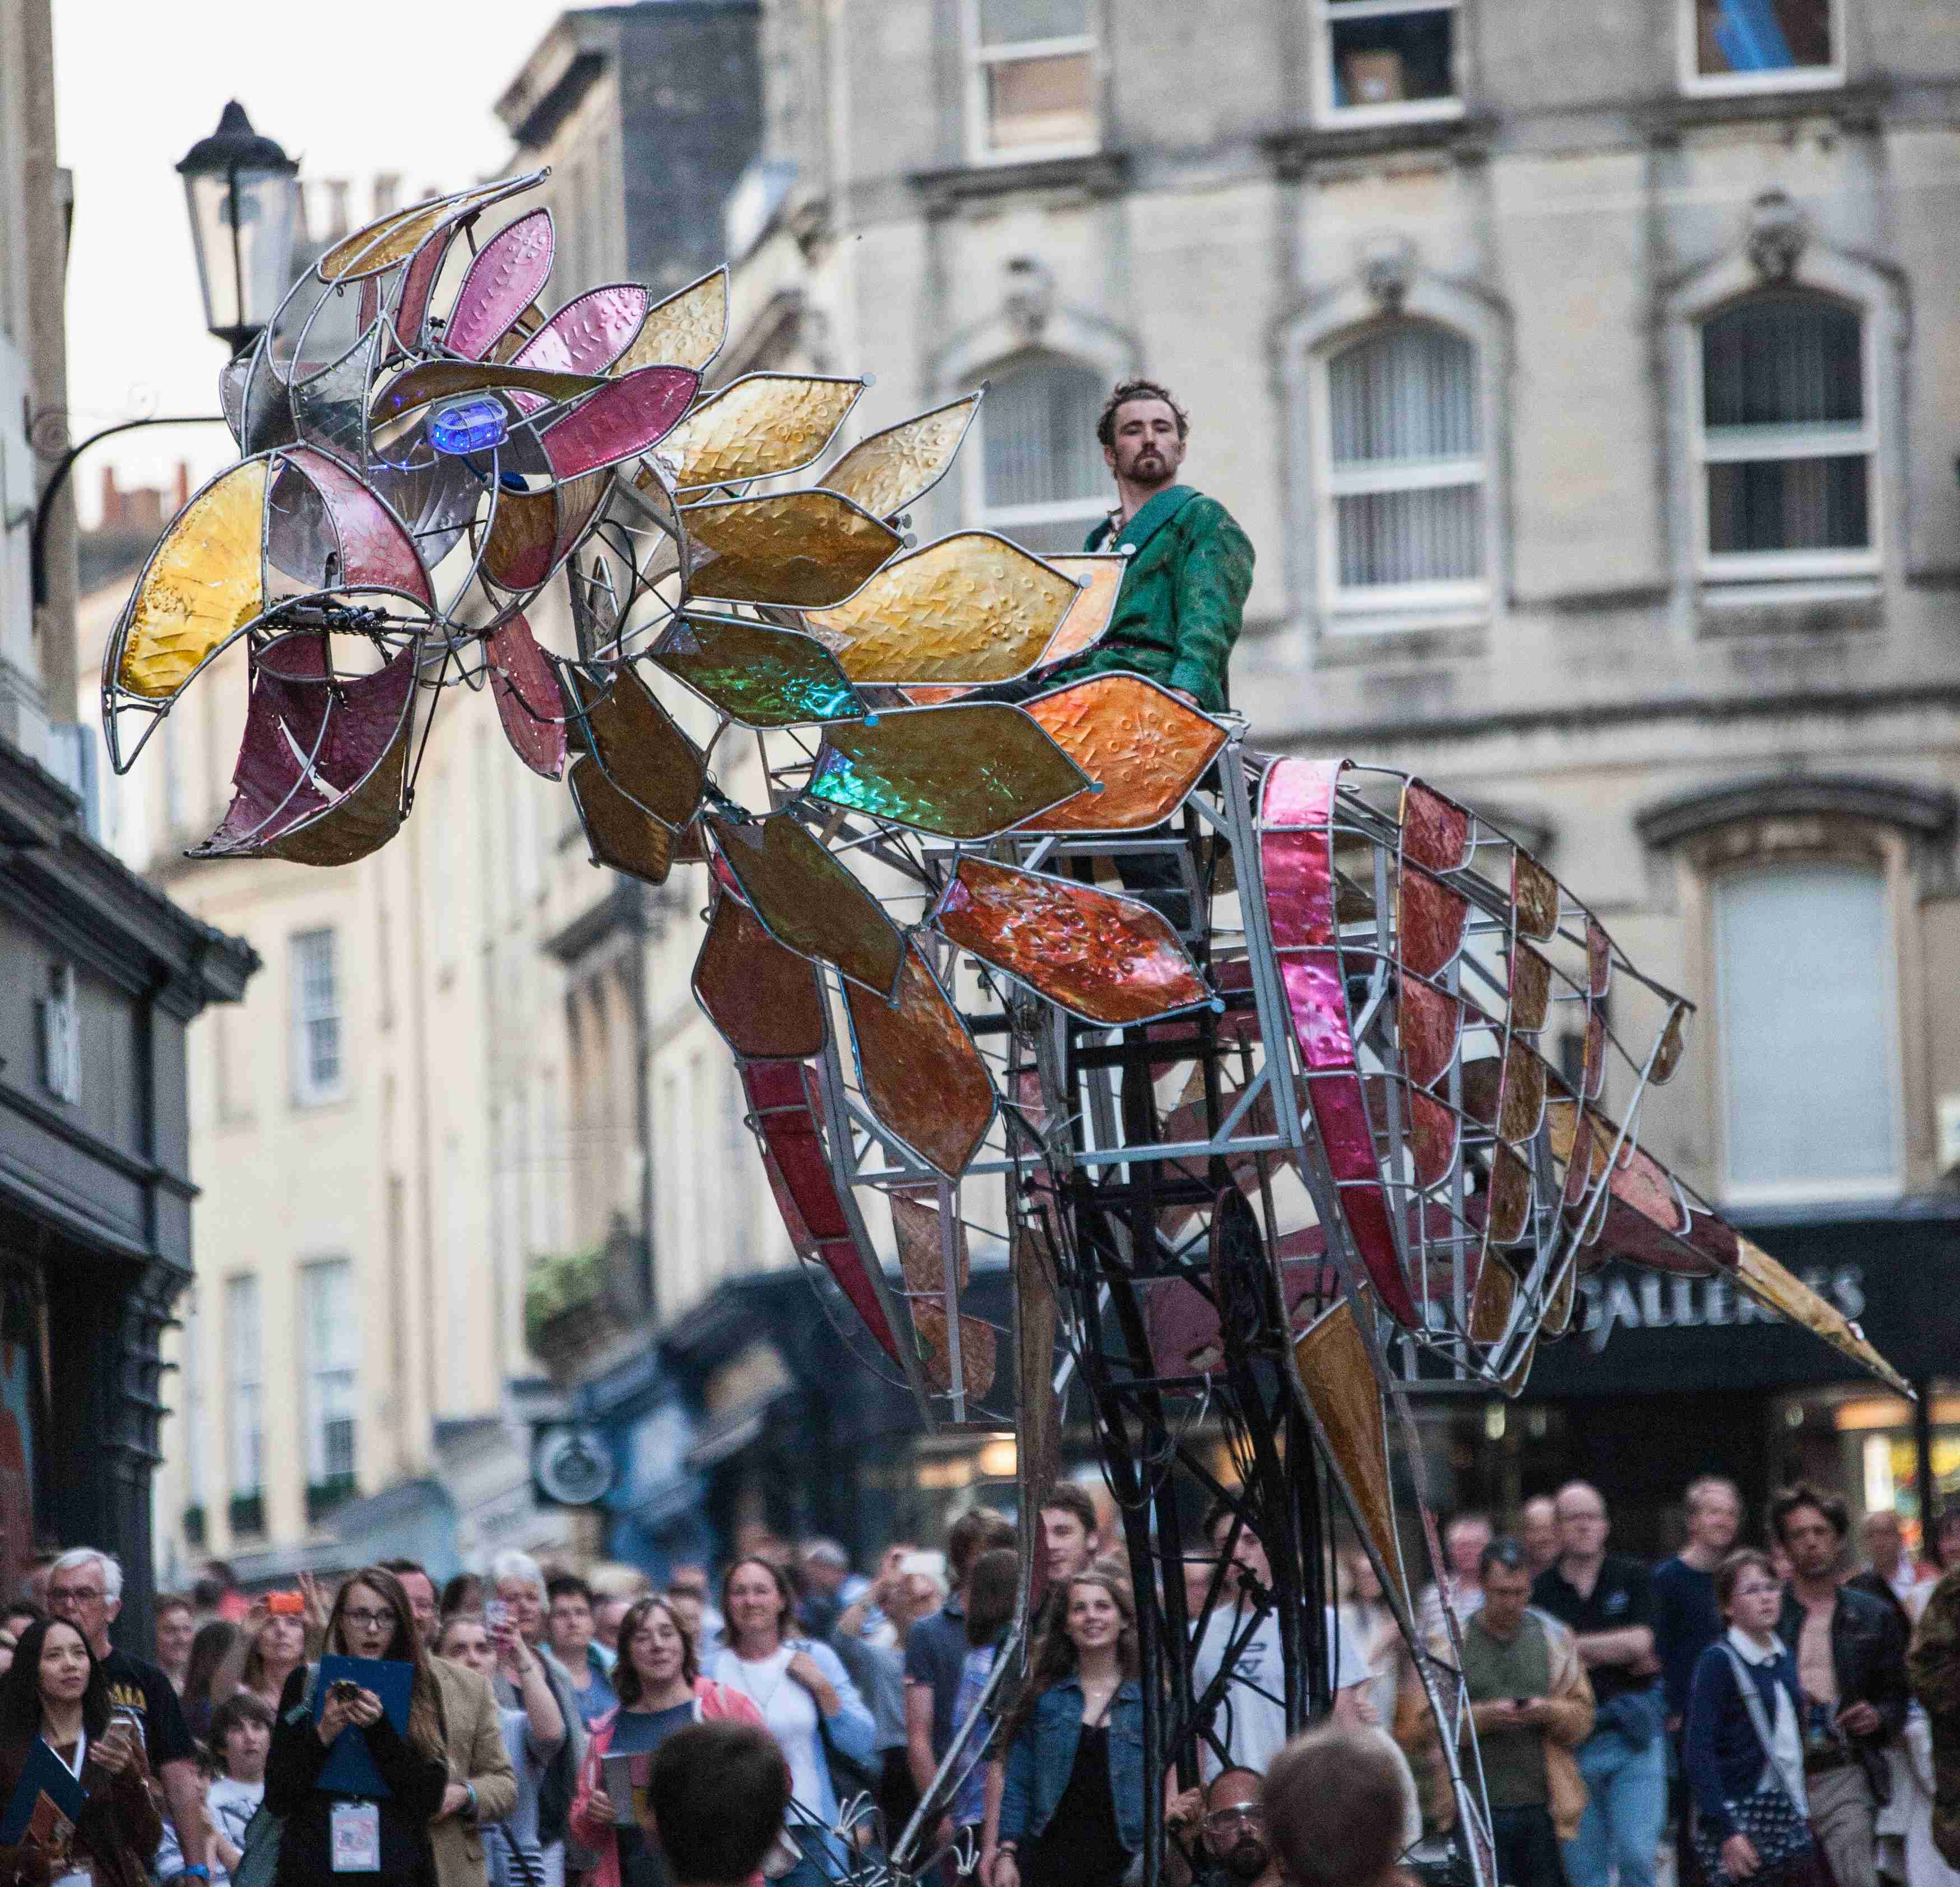 ‘Wild about Maidstone’ arts carnival comes to town